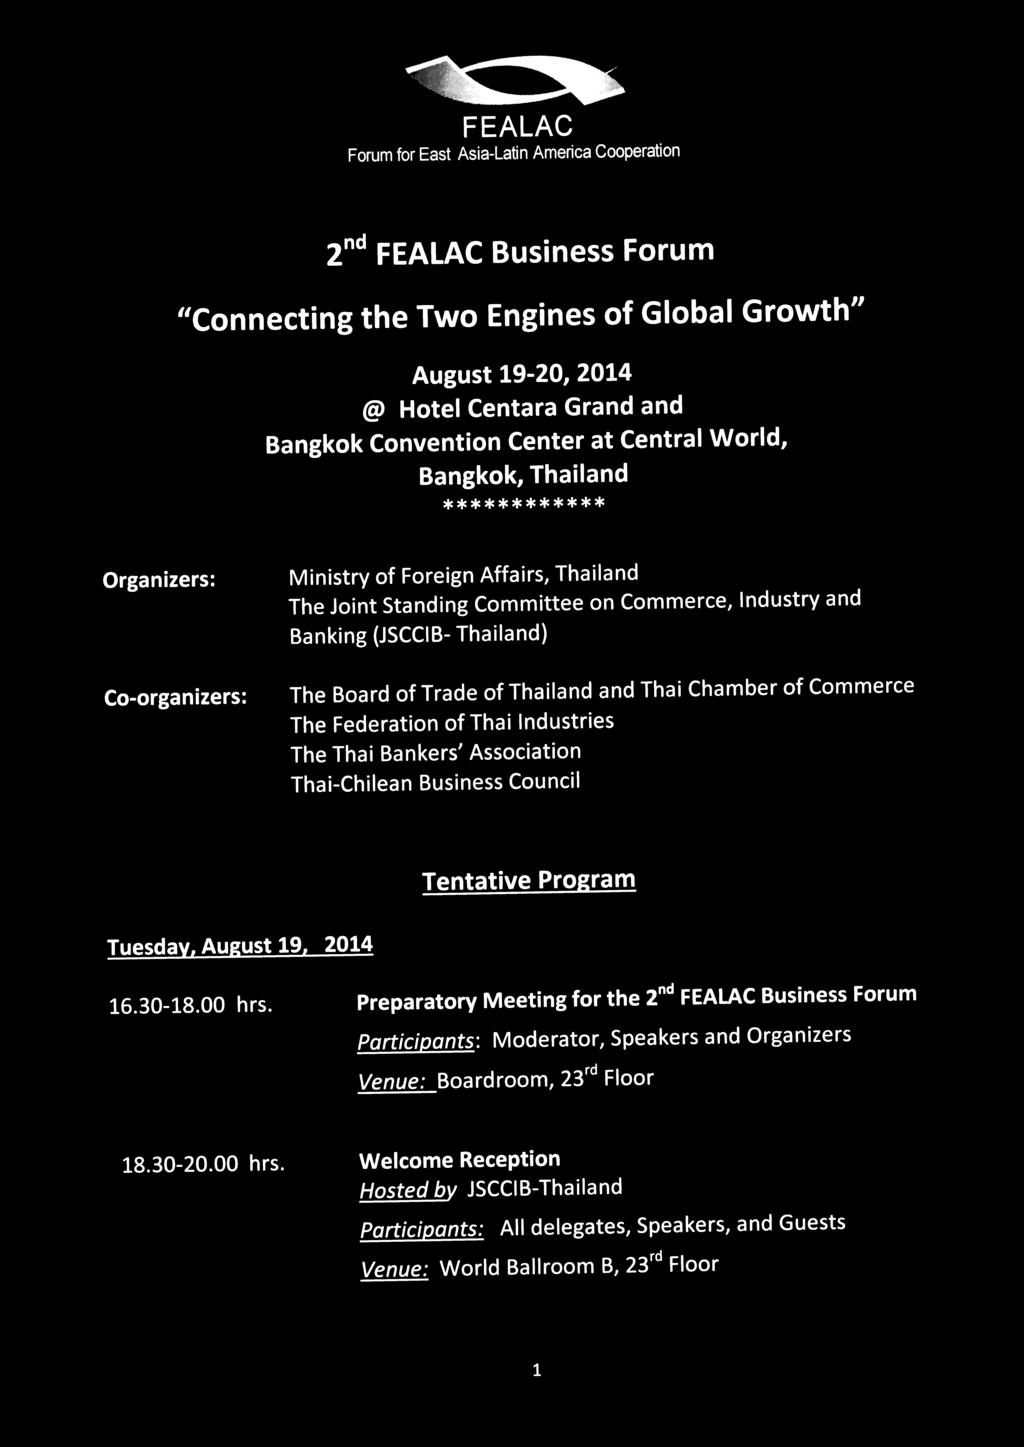 Board of Trade of Thailand and Thai Chamber of Commerce The Federation of Thai Industries The Thai Bankers' Association Thai-Chilean Business Council Tentative Program Tuesday, August 19, 2014 16.